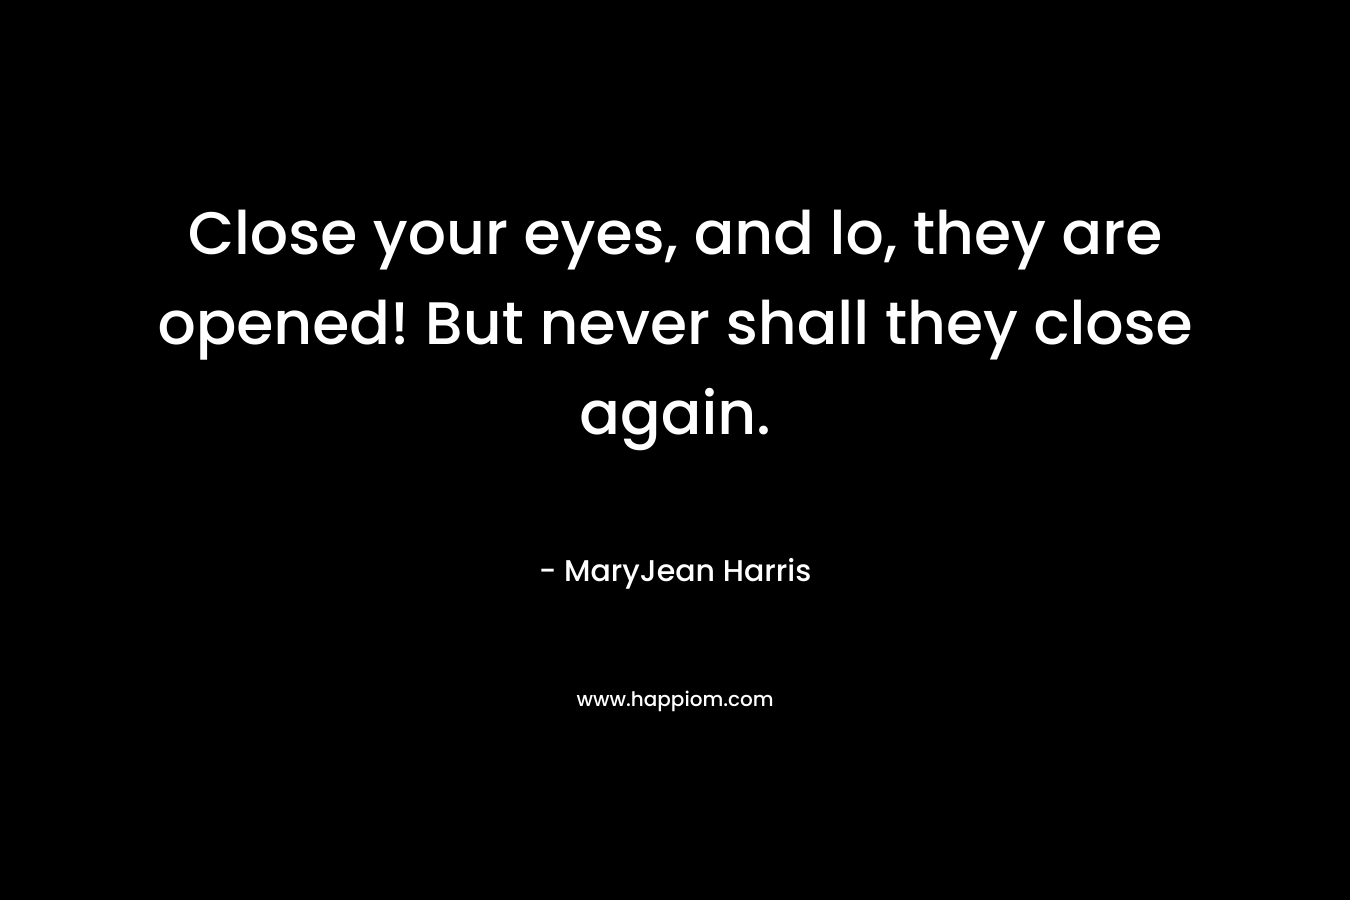 Close your eyes, and lo, they are opened! But never shall they close again. – MaryJean Harris